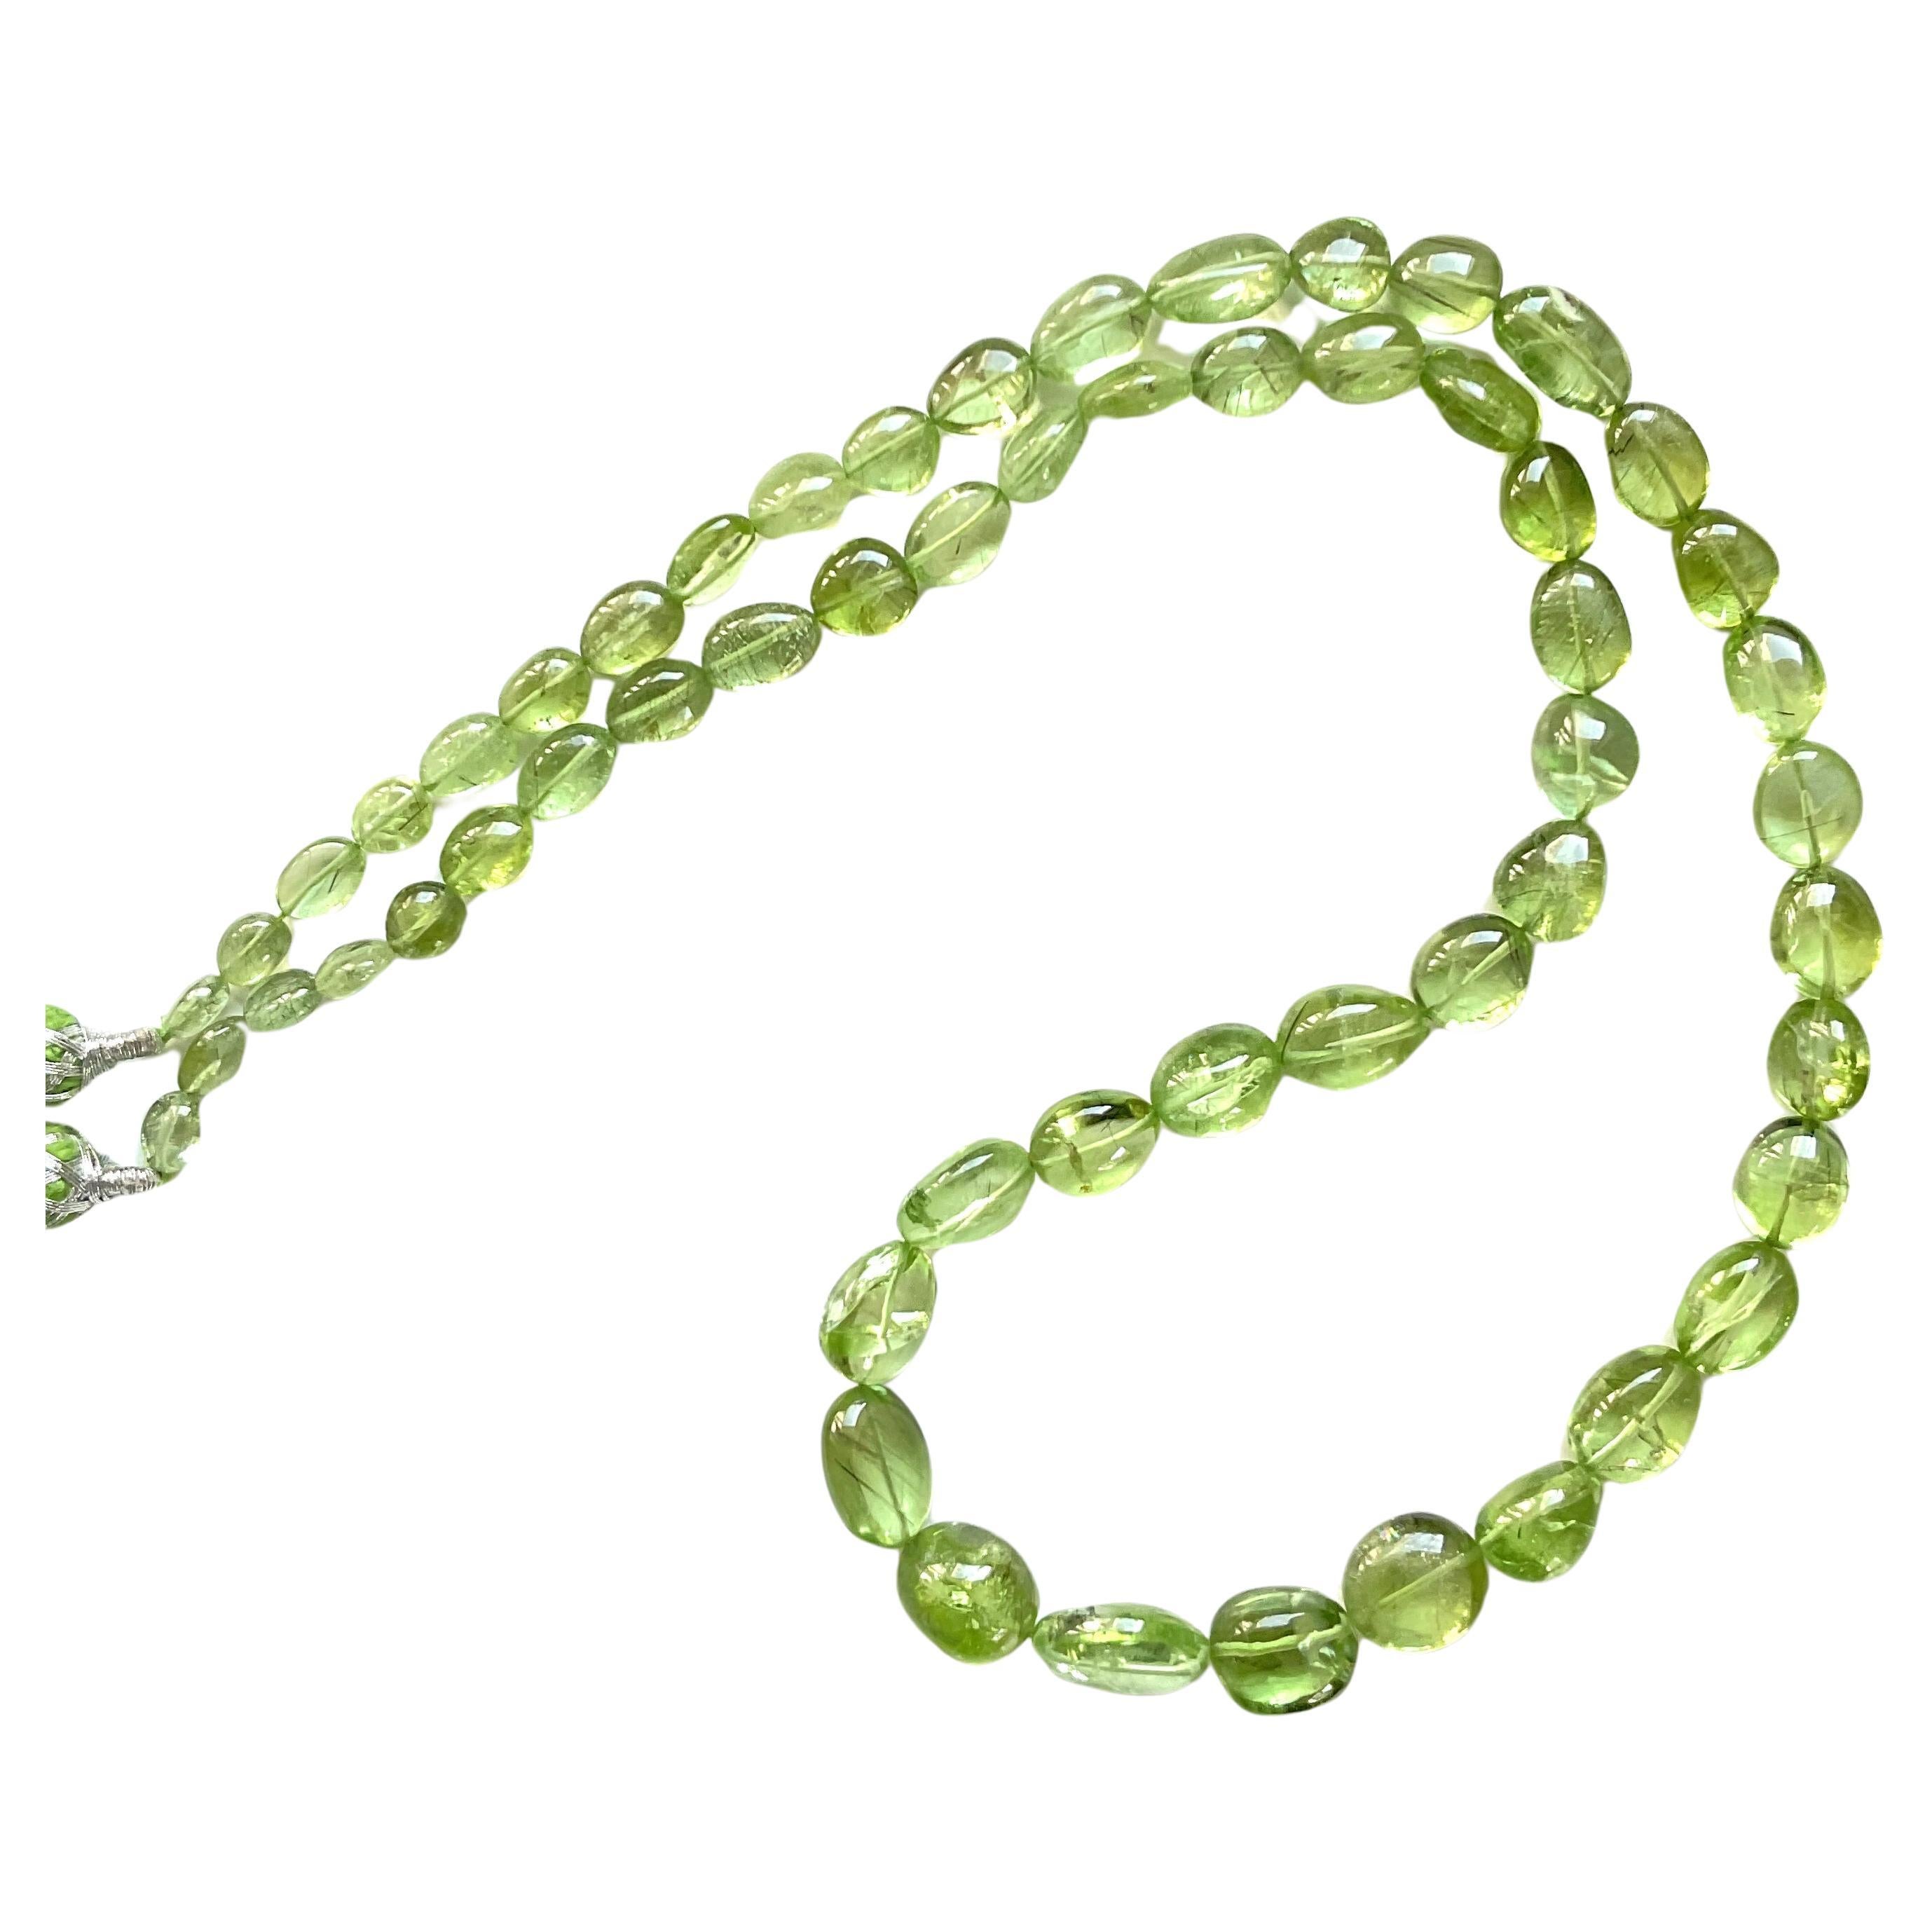 233.75 carats apple green peridot top quality plain tumbled natural necklace gem For Sale